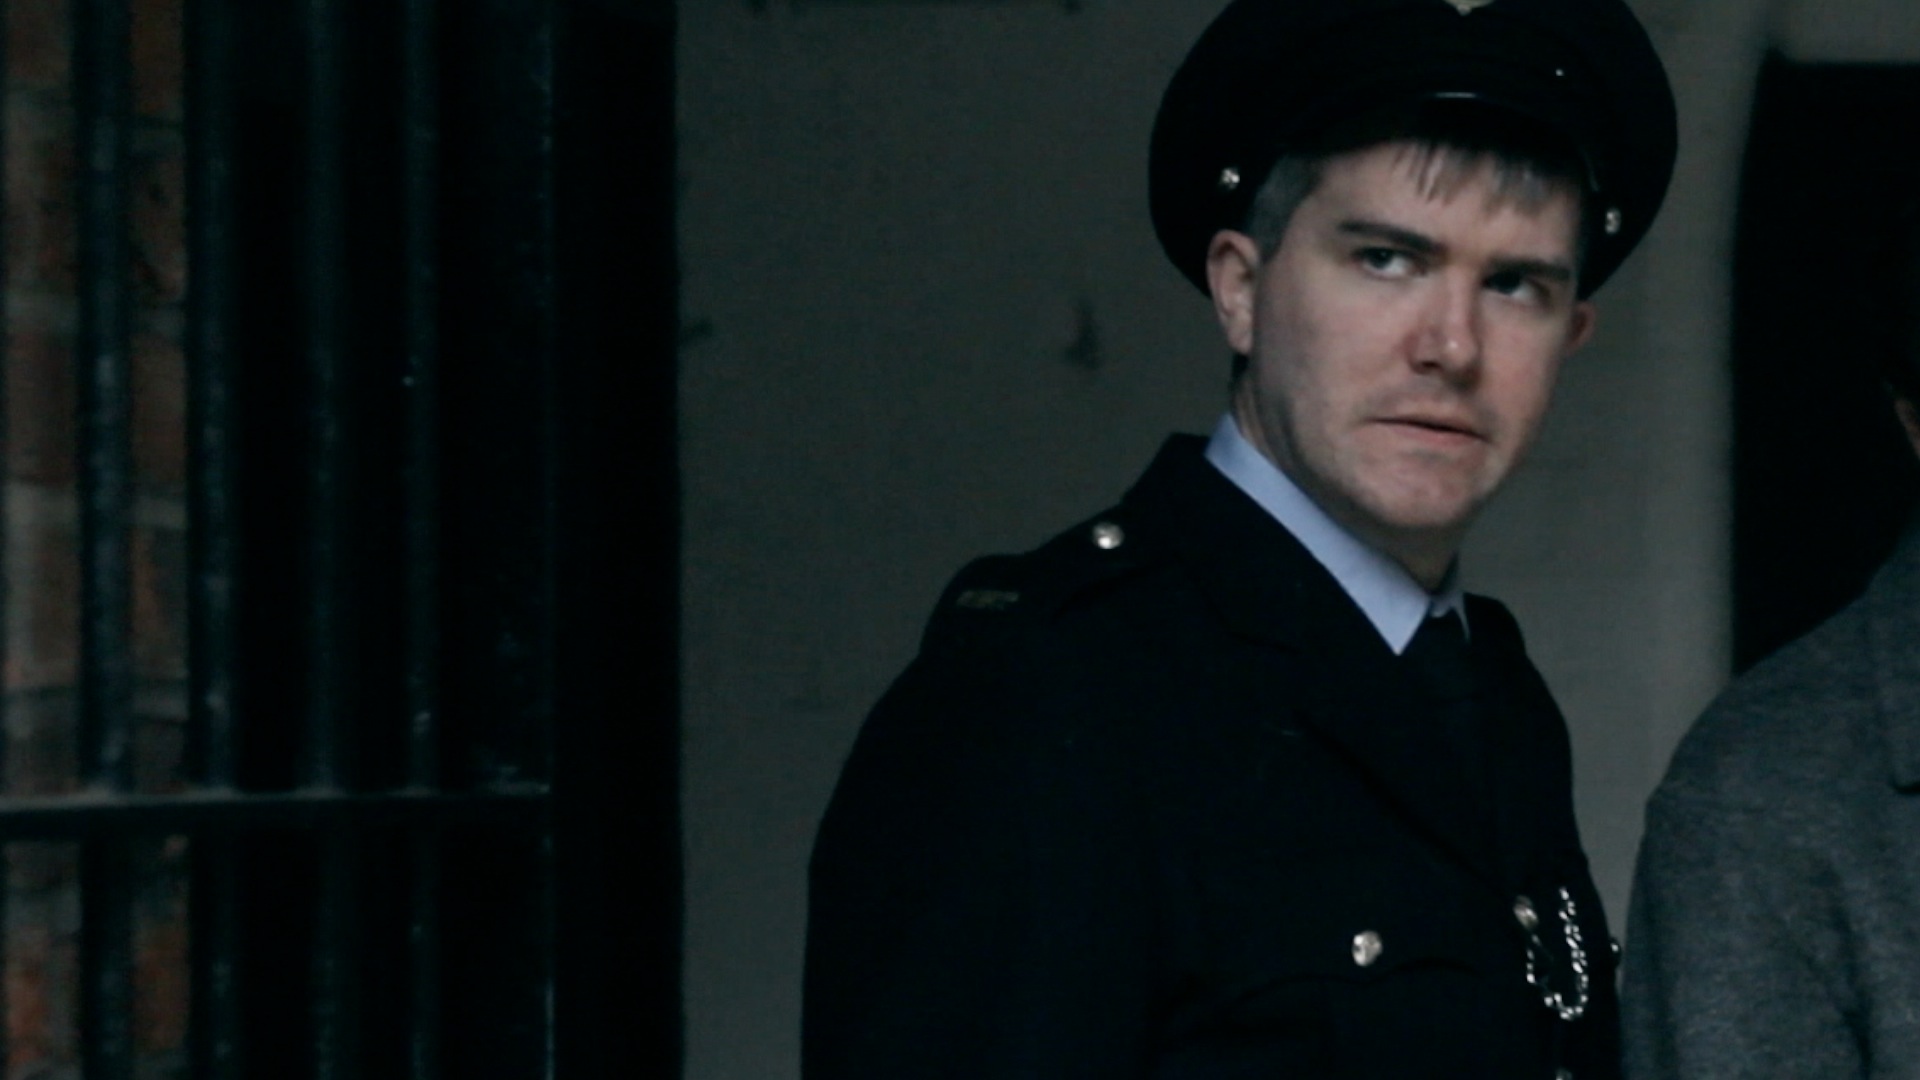 Director John Maltby, playing his cameo role as The Guard in Gallows